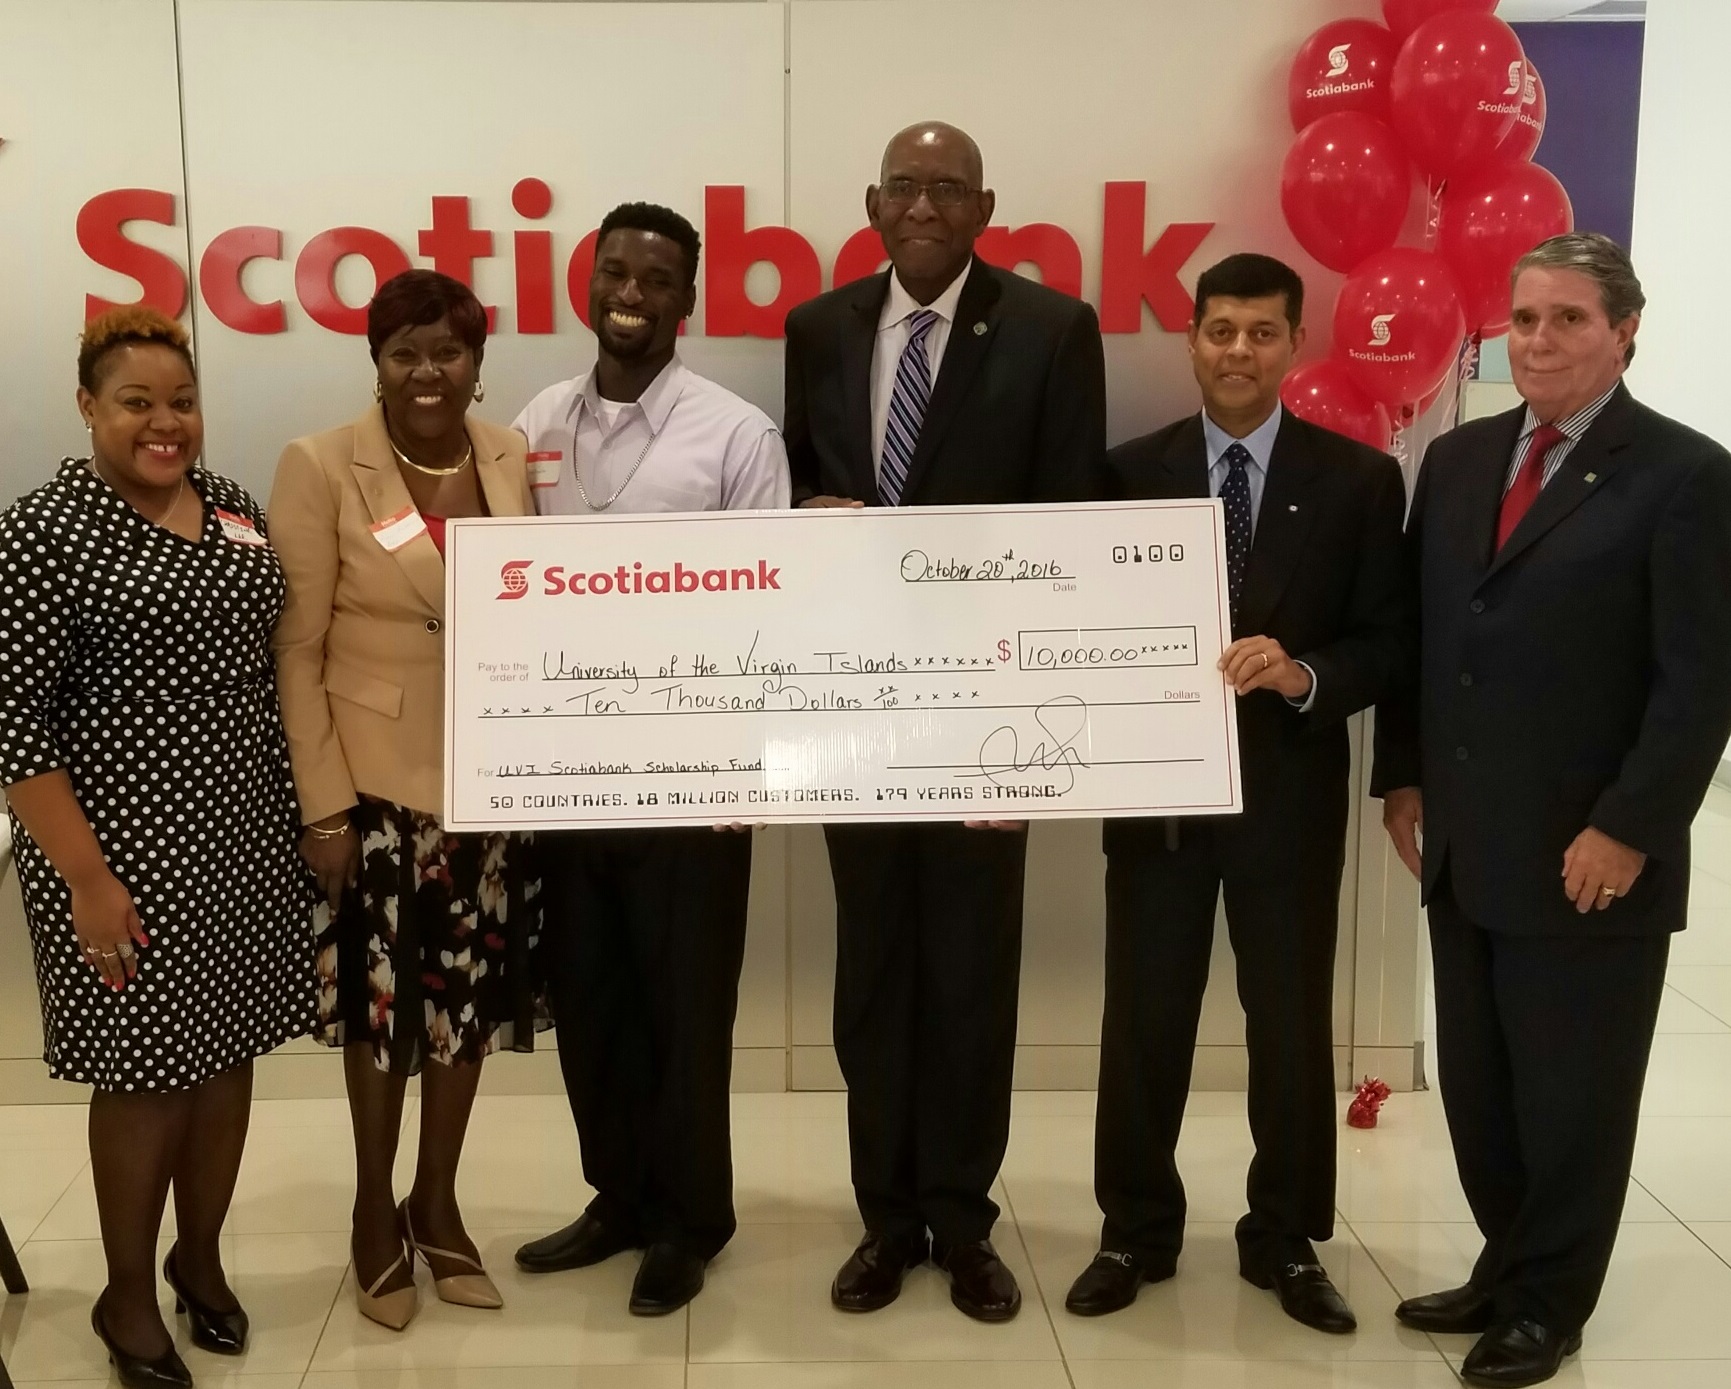 Scotiabank donates $10,000 to two UVI students from St. Croix and St. Thomas.